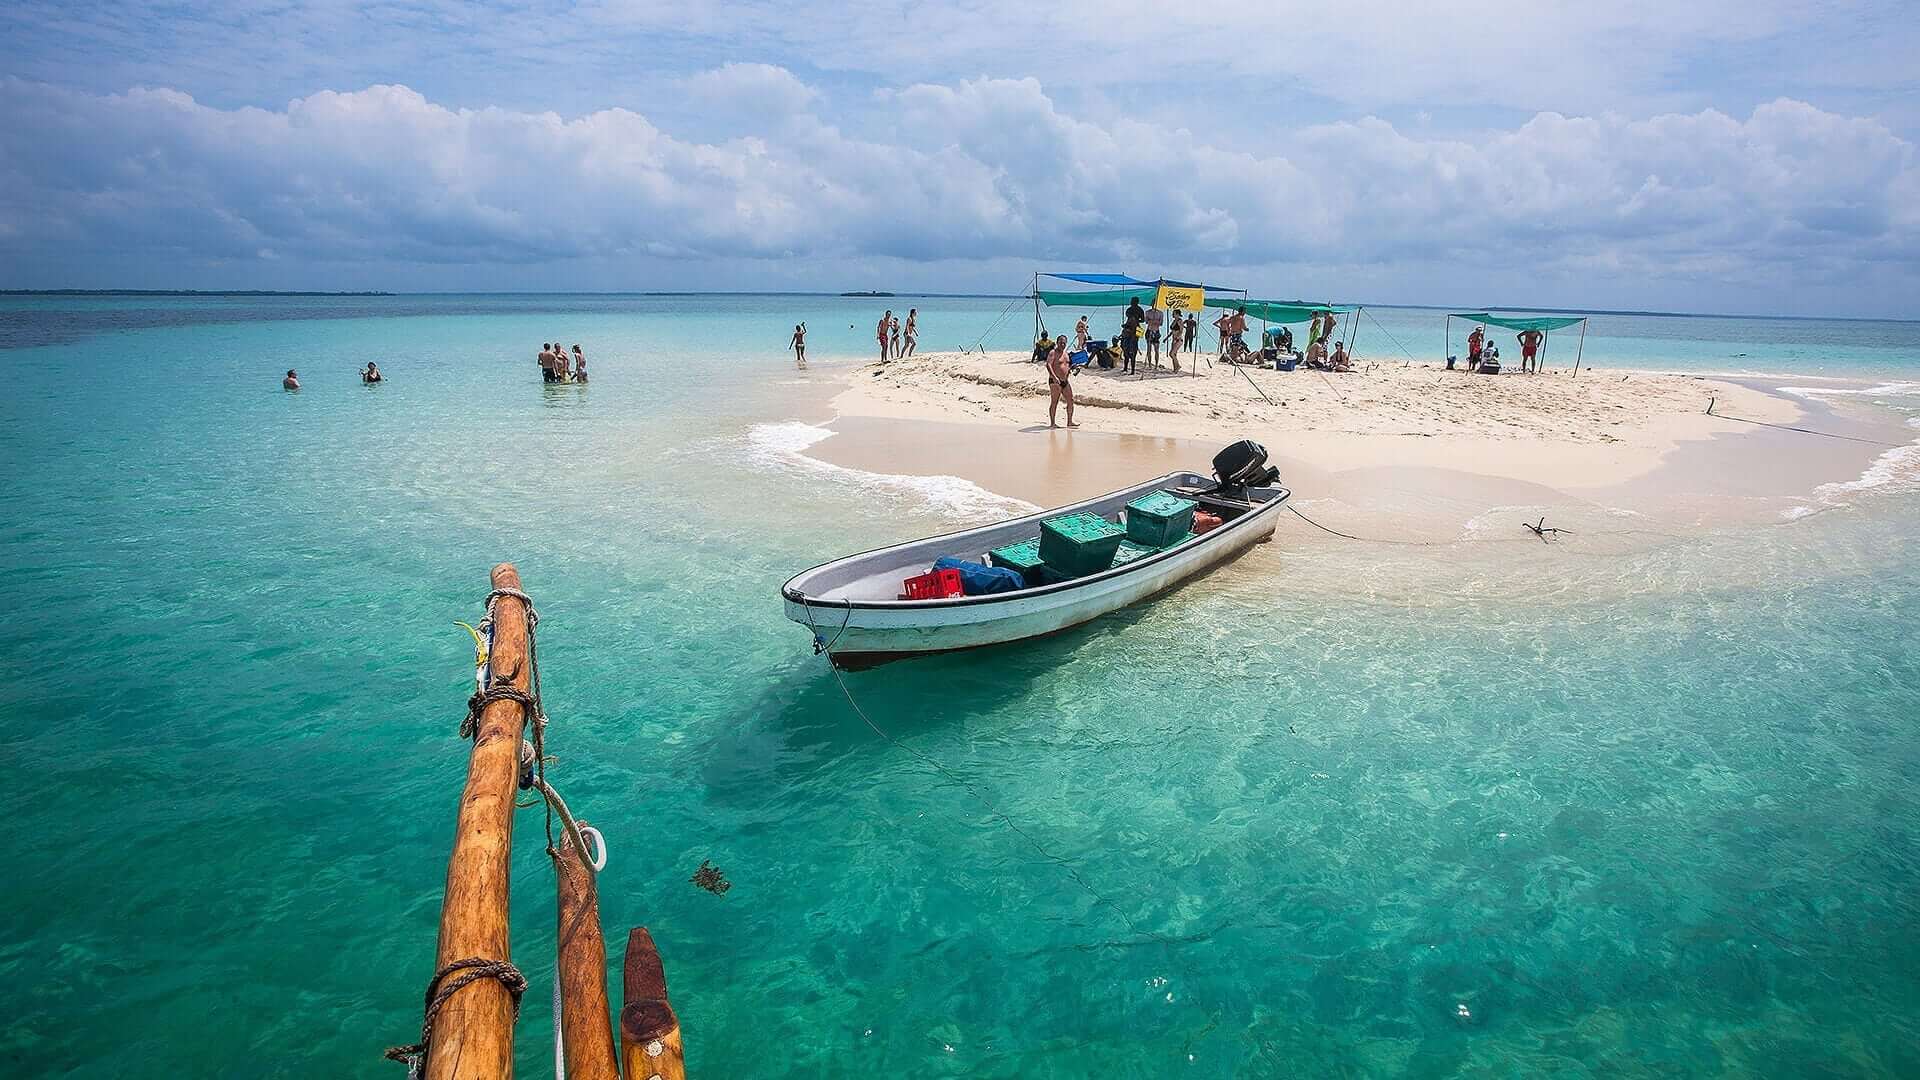 Safari Blue Tour in Zanzibar is the Zanzibar number one full day trip, this is a sea adventure safari starts from Fumba fishing village, south west coast of the island, the major attraction is to swim, snorkeling, sea foods and sailing within the traditional dhow